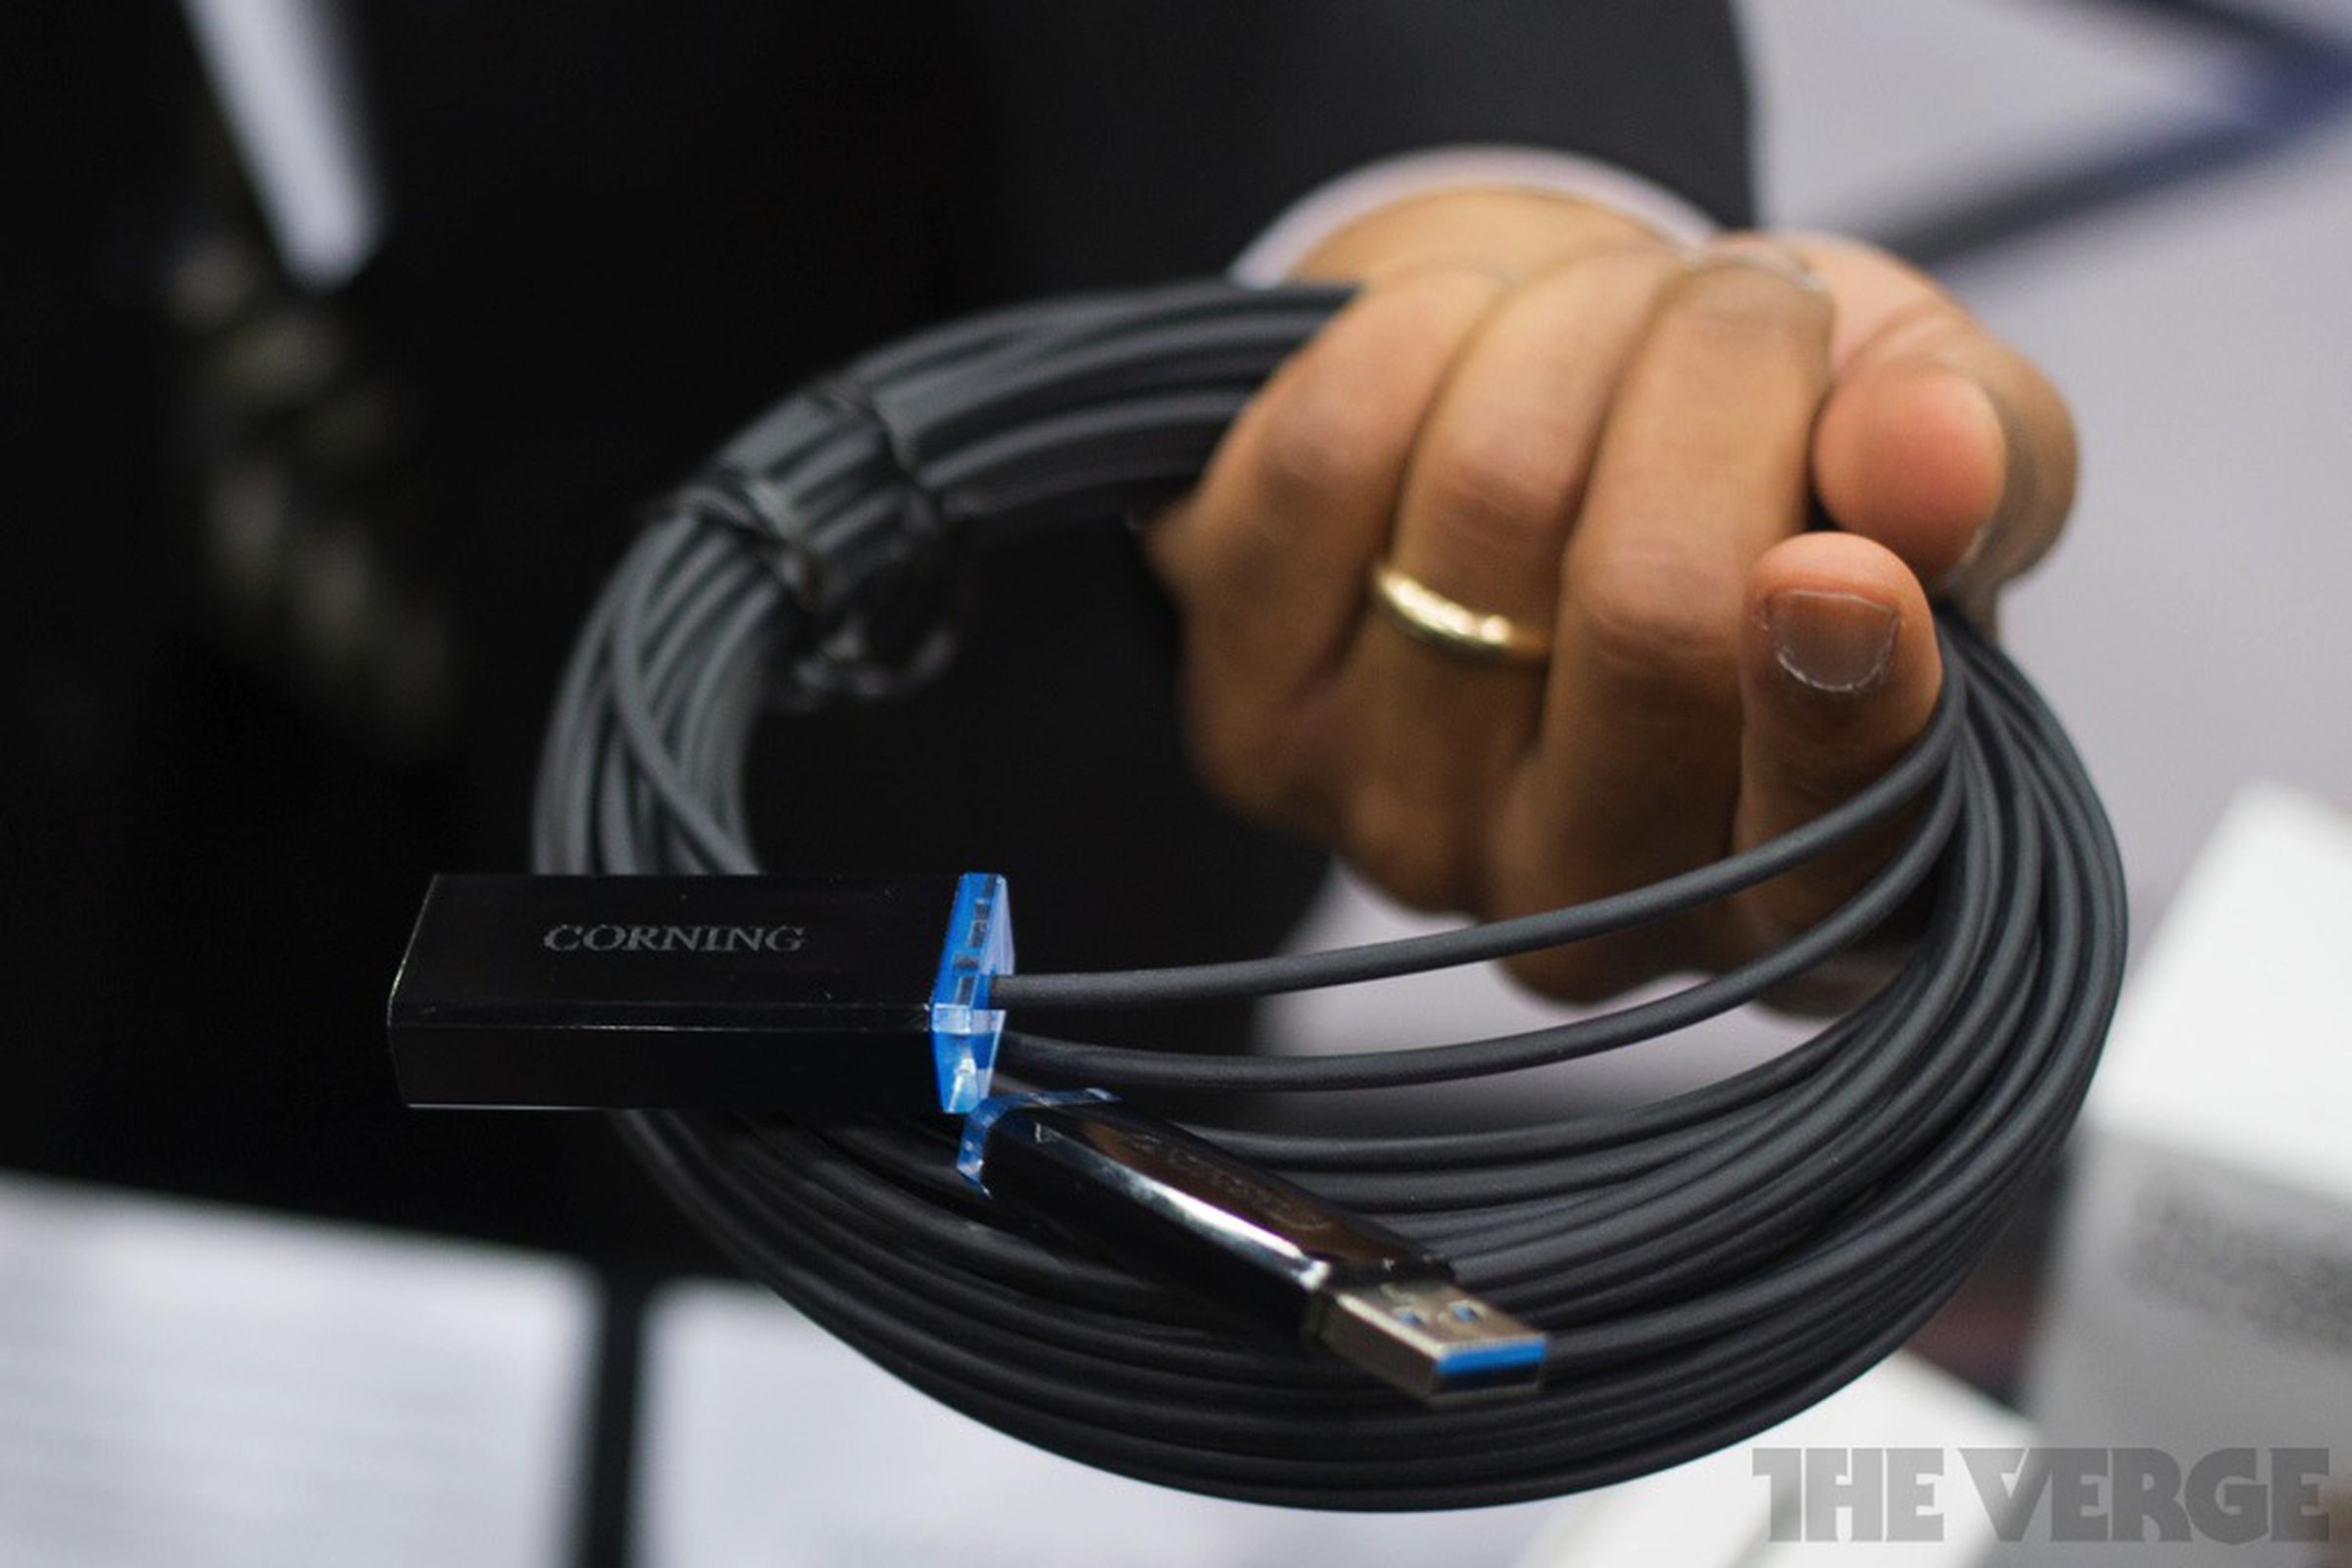 Corning optical cables